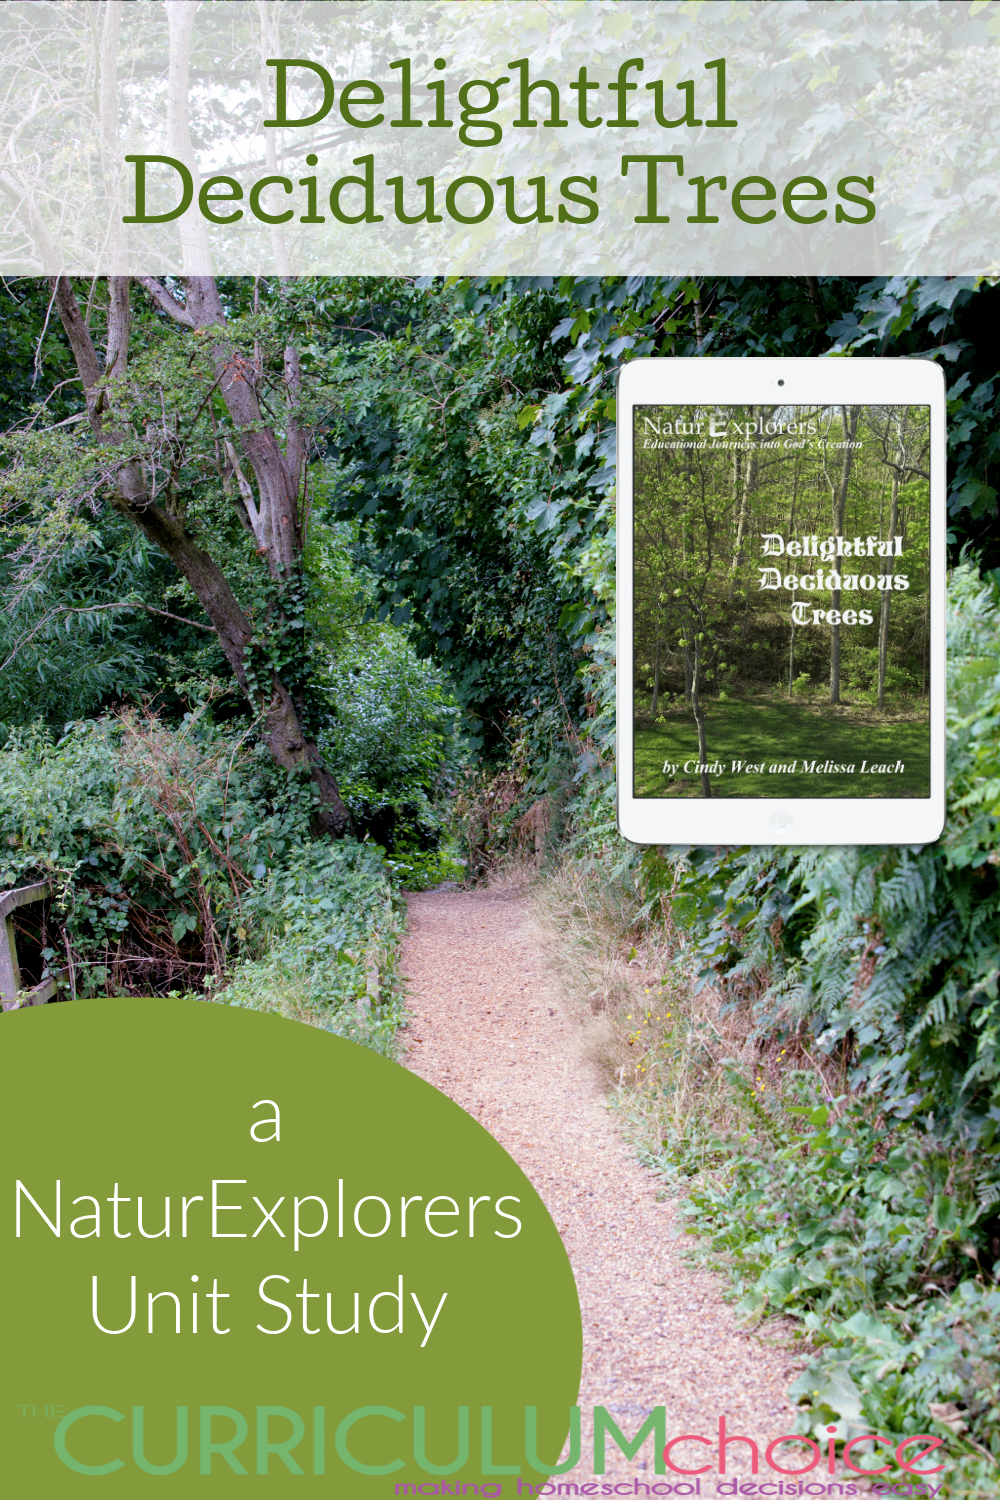 Review of NaturExplorers Delightful Deciduous Trees and how this unit study works for both new and seasoned homeschoolers!